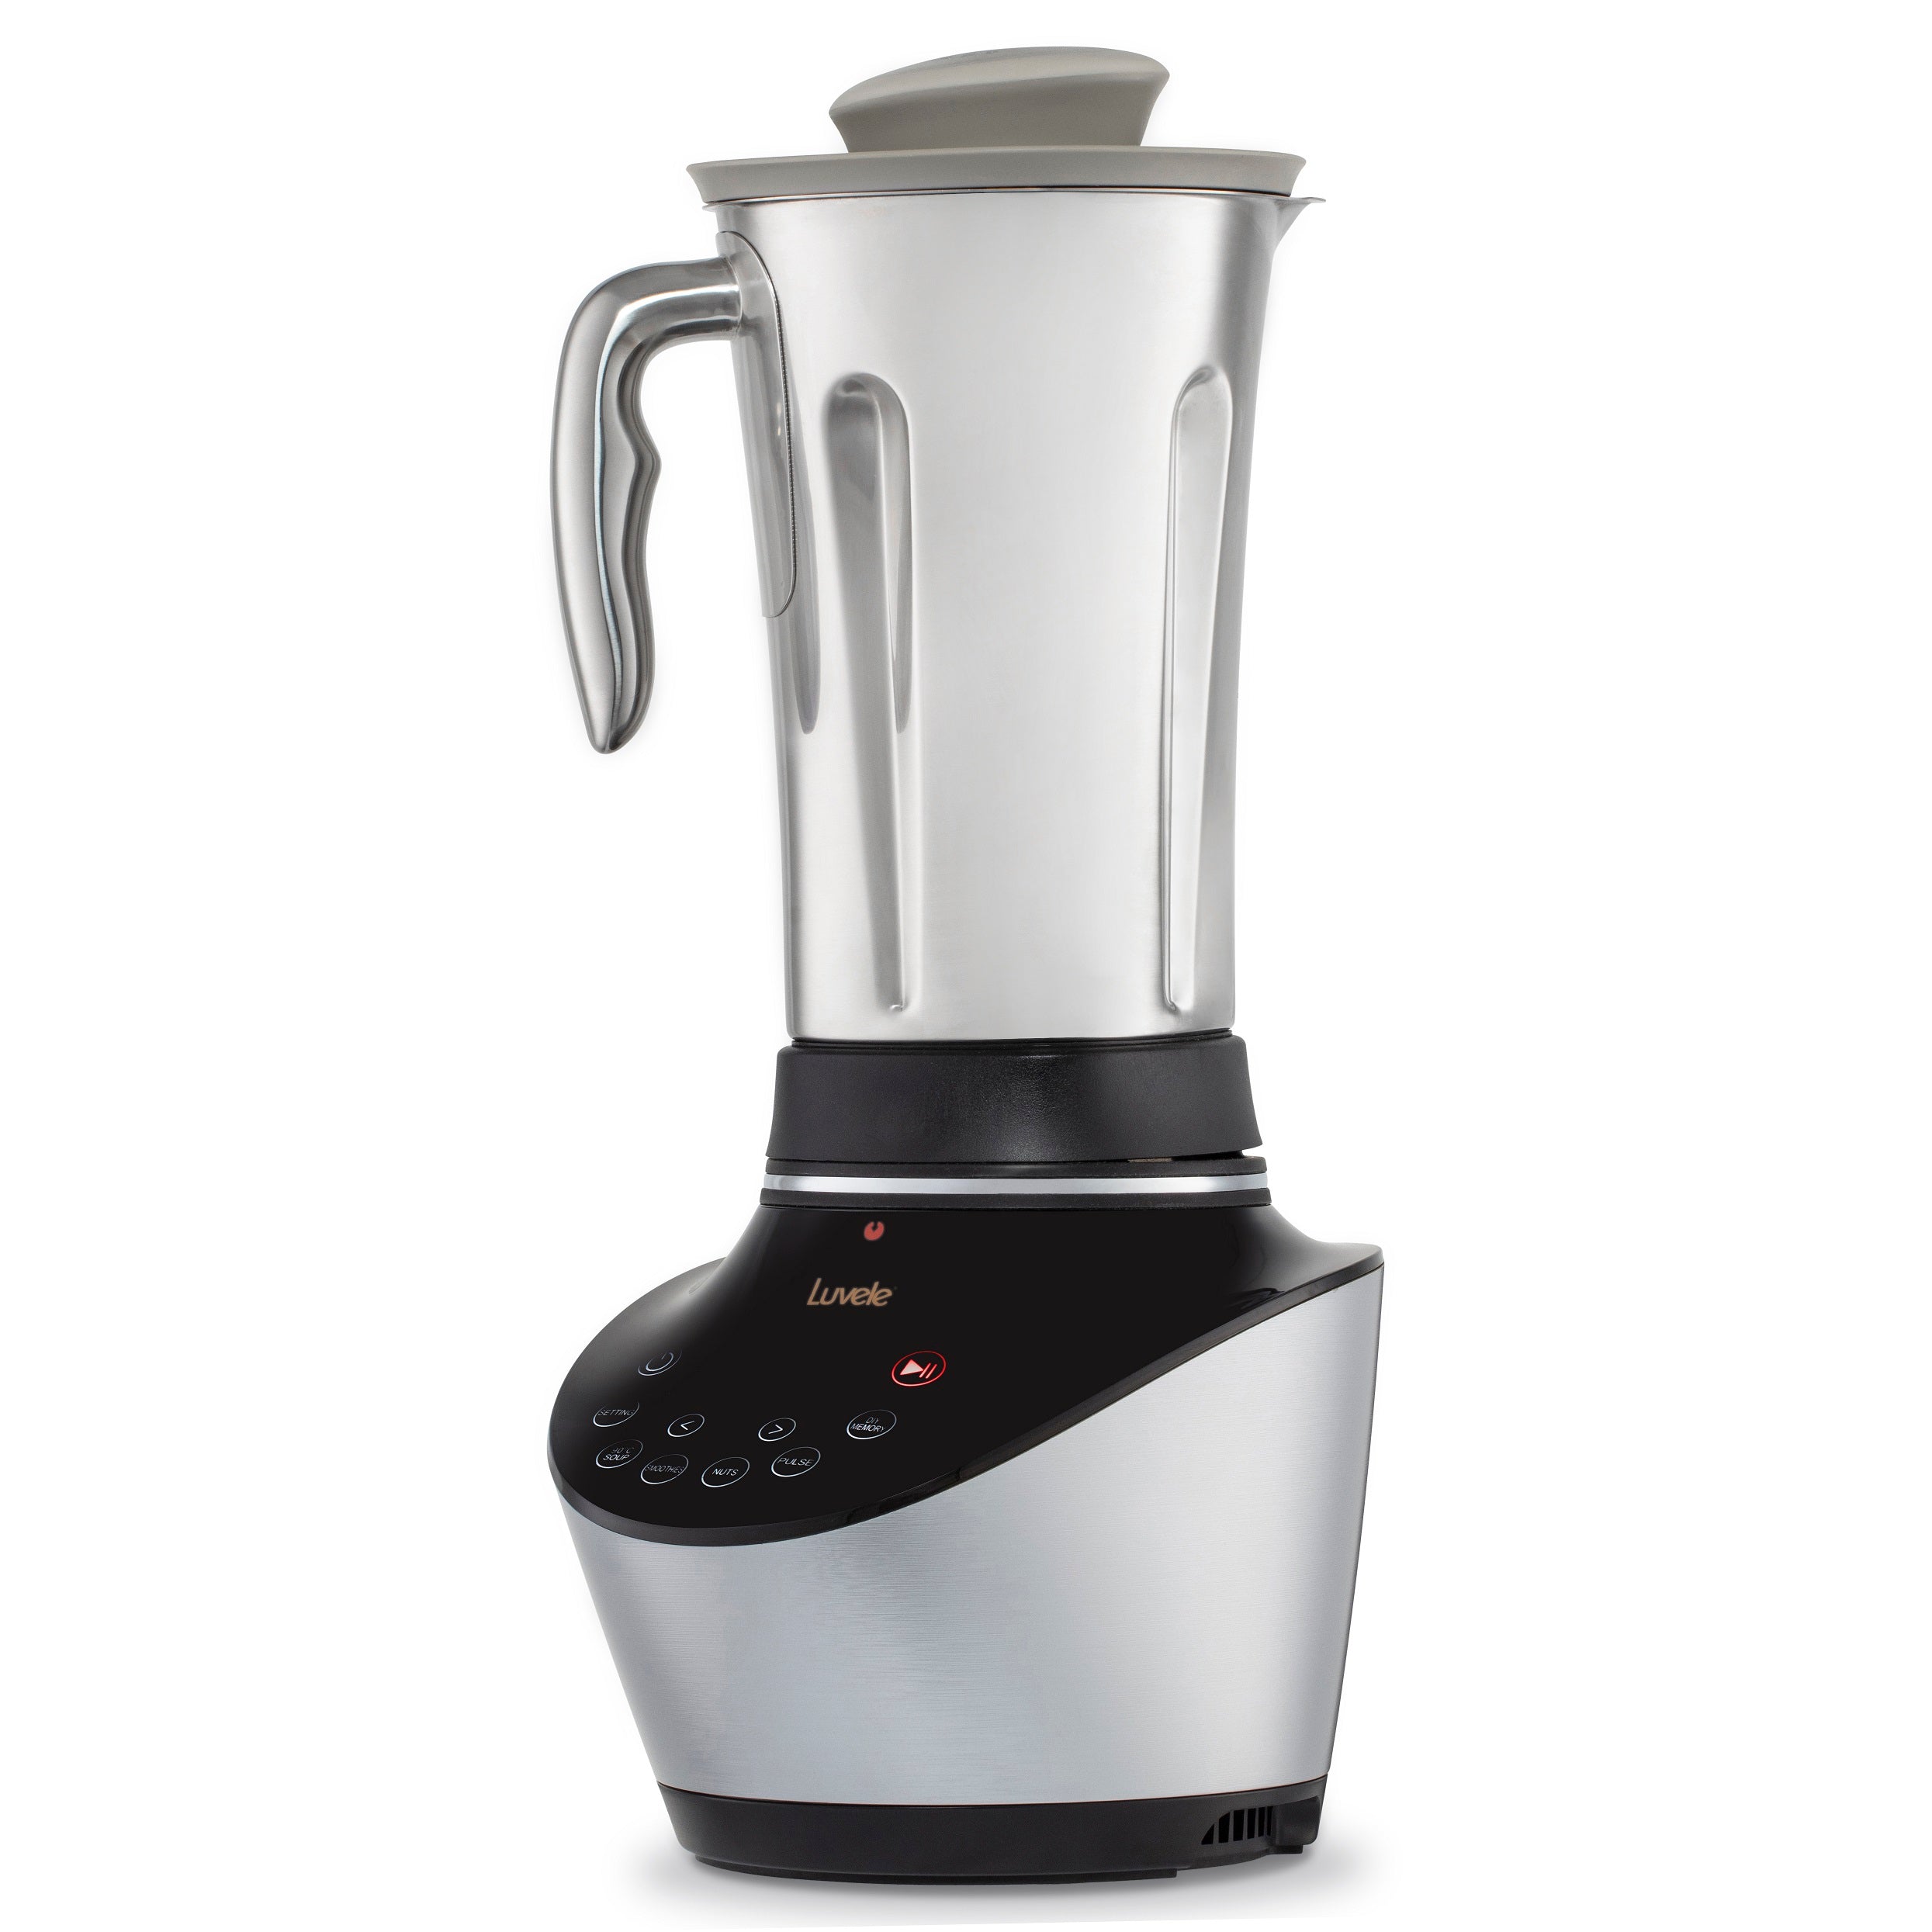 Living Solutions 5 Speed Blender with Stainless Steel Decoration